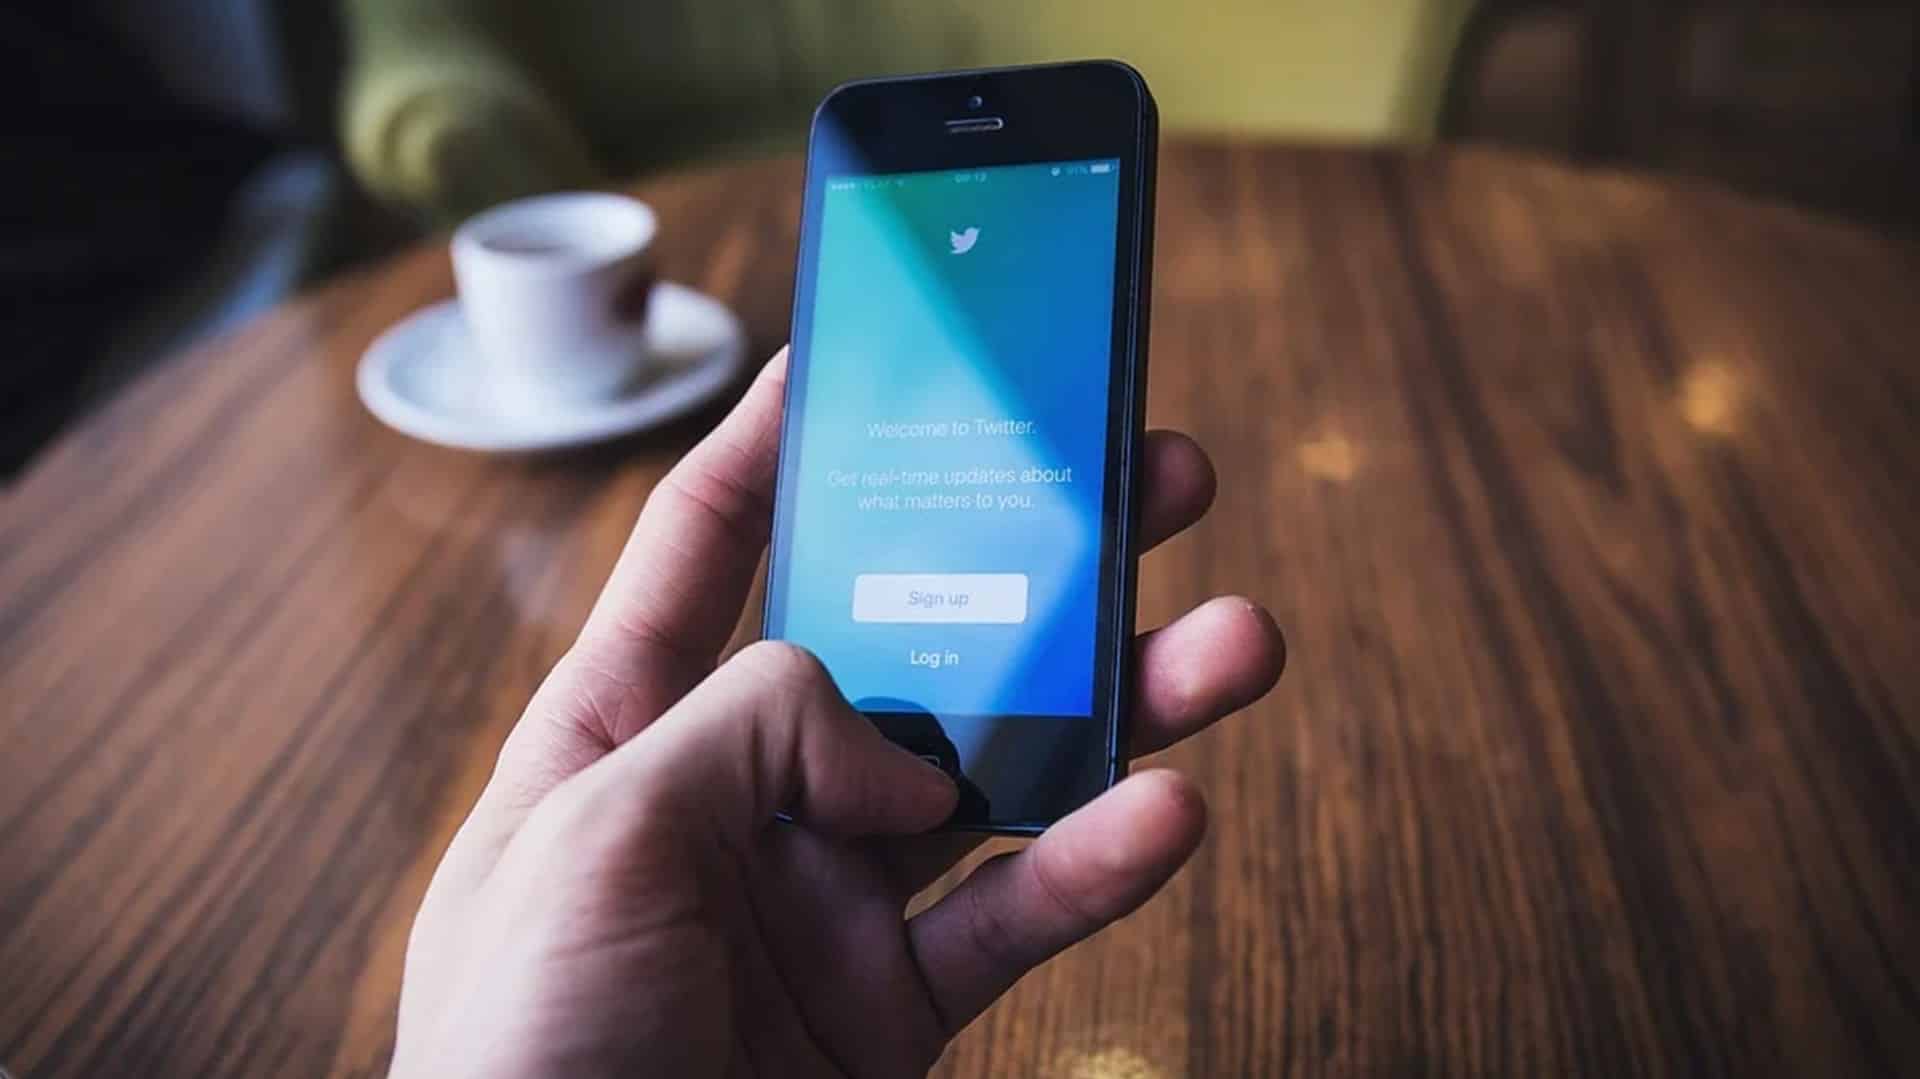 Twitter launches crypto division to explore bitcoin, blockchains uses